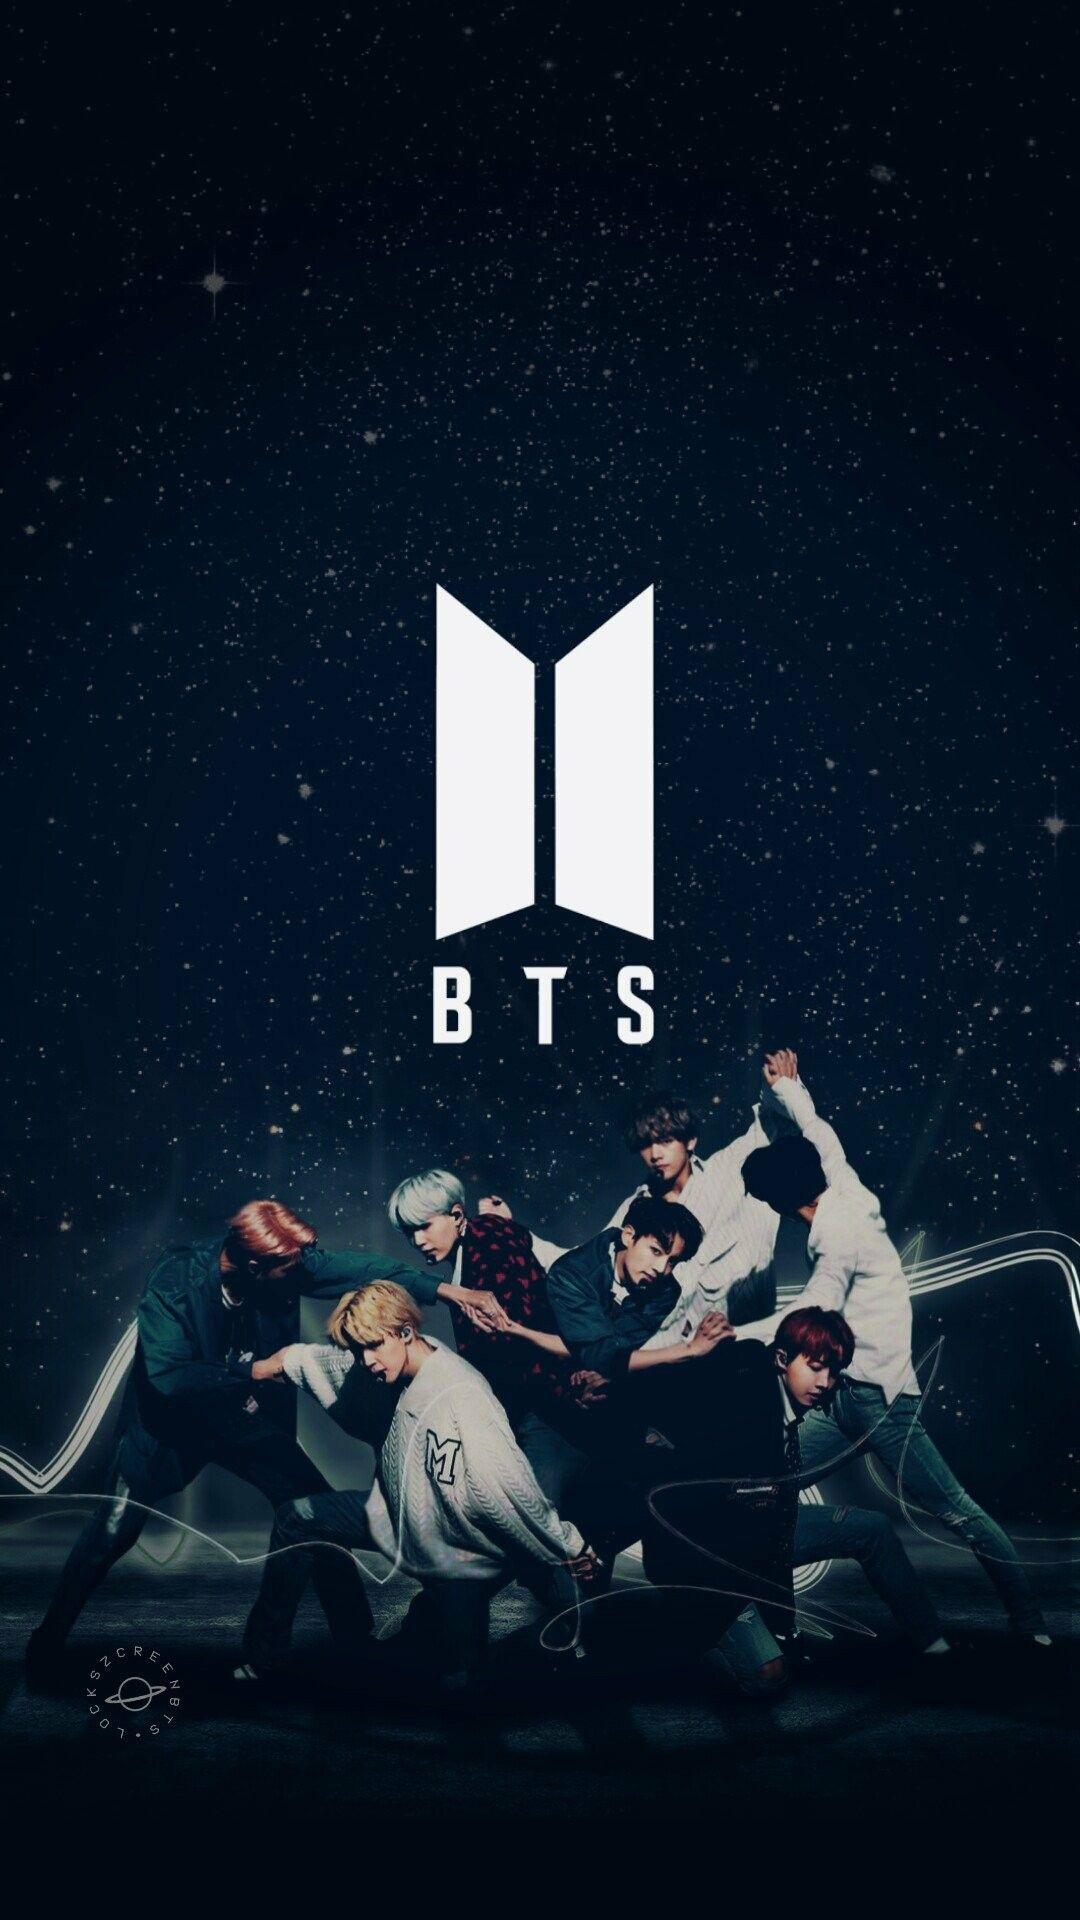 300+ Bts Wallpaper Hd For Iphone For FREE - MyWeb